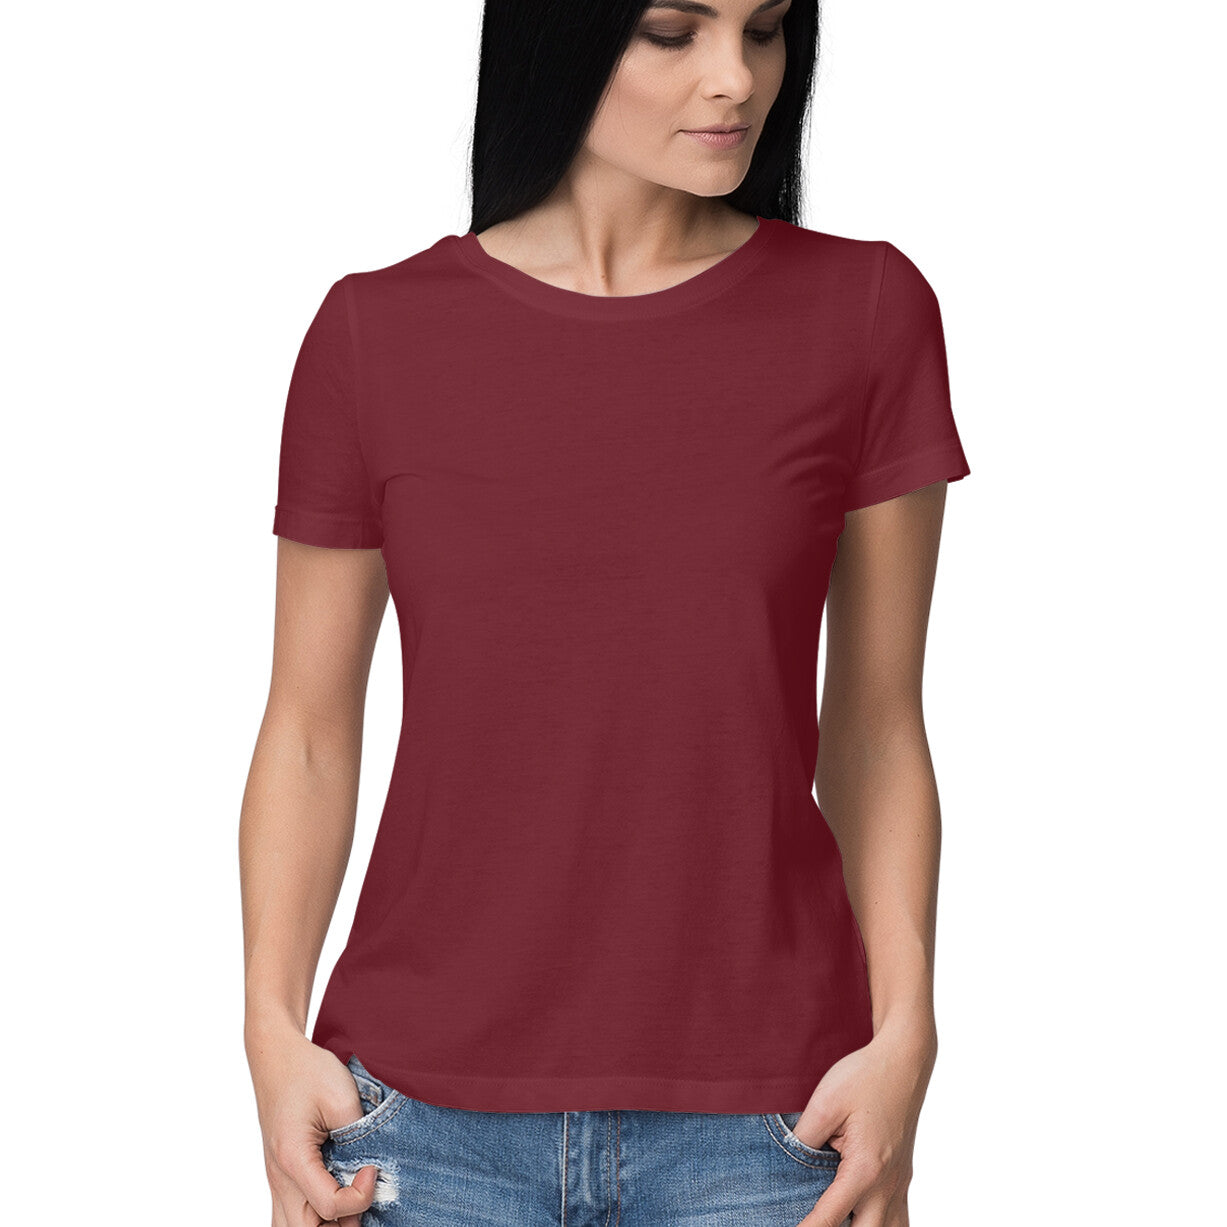 Women's Round Neck Solid Color Tee Shirt - Red